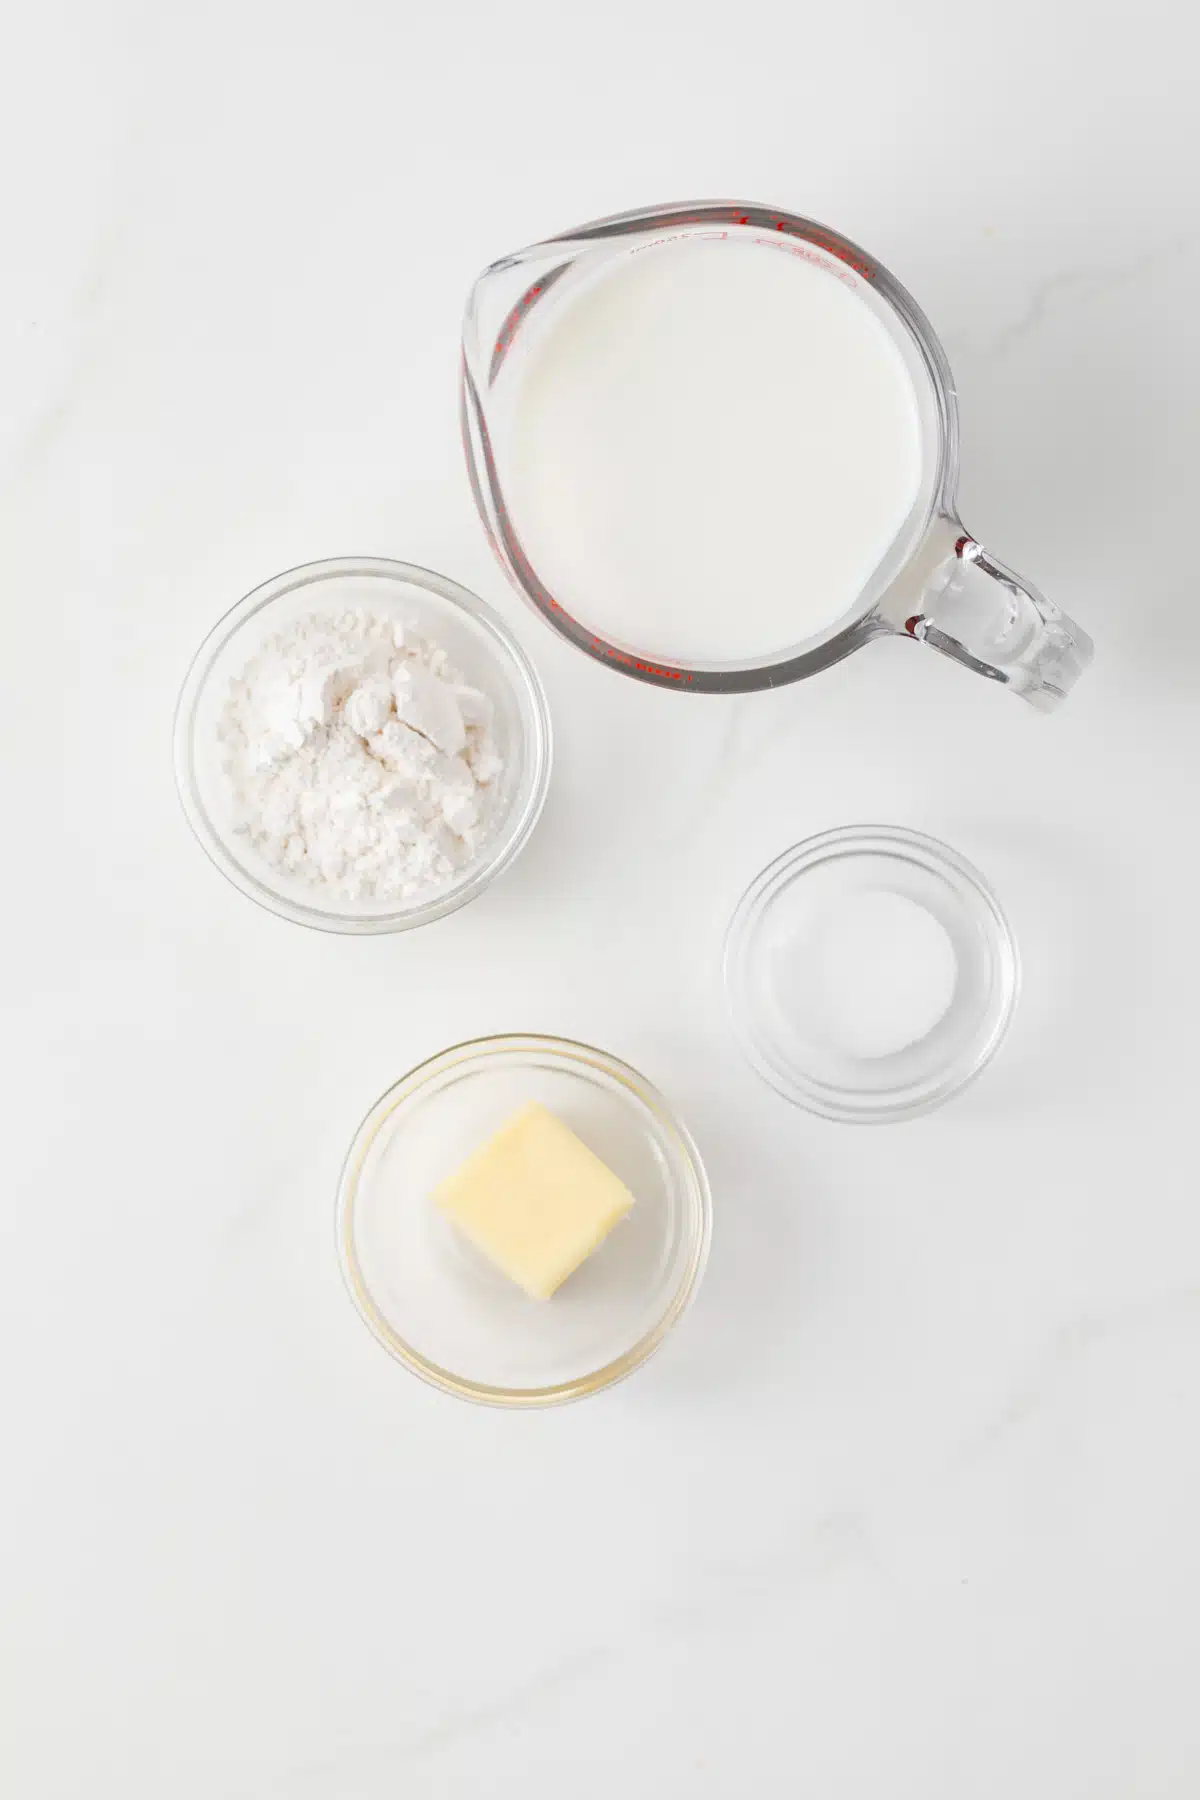 Ingredients for Basic White Sauce (Béchamel) in glass bowls.